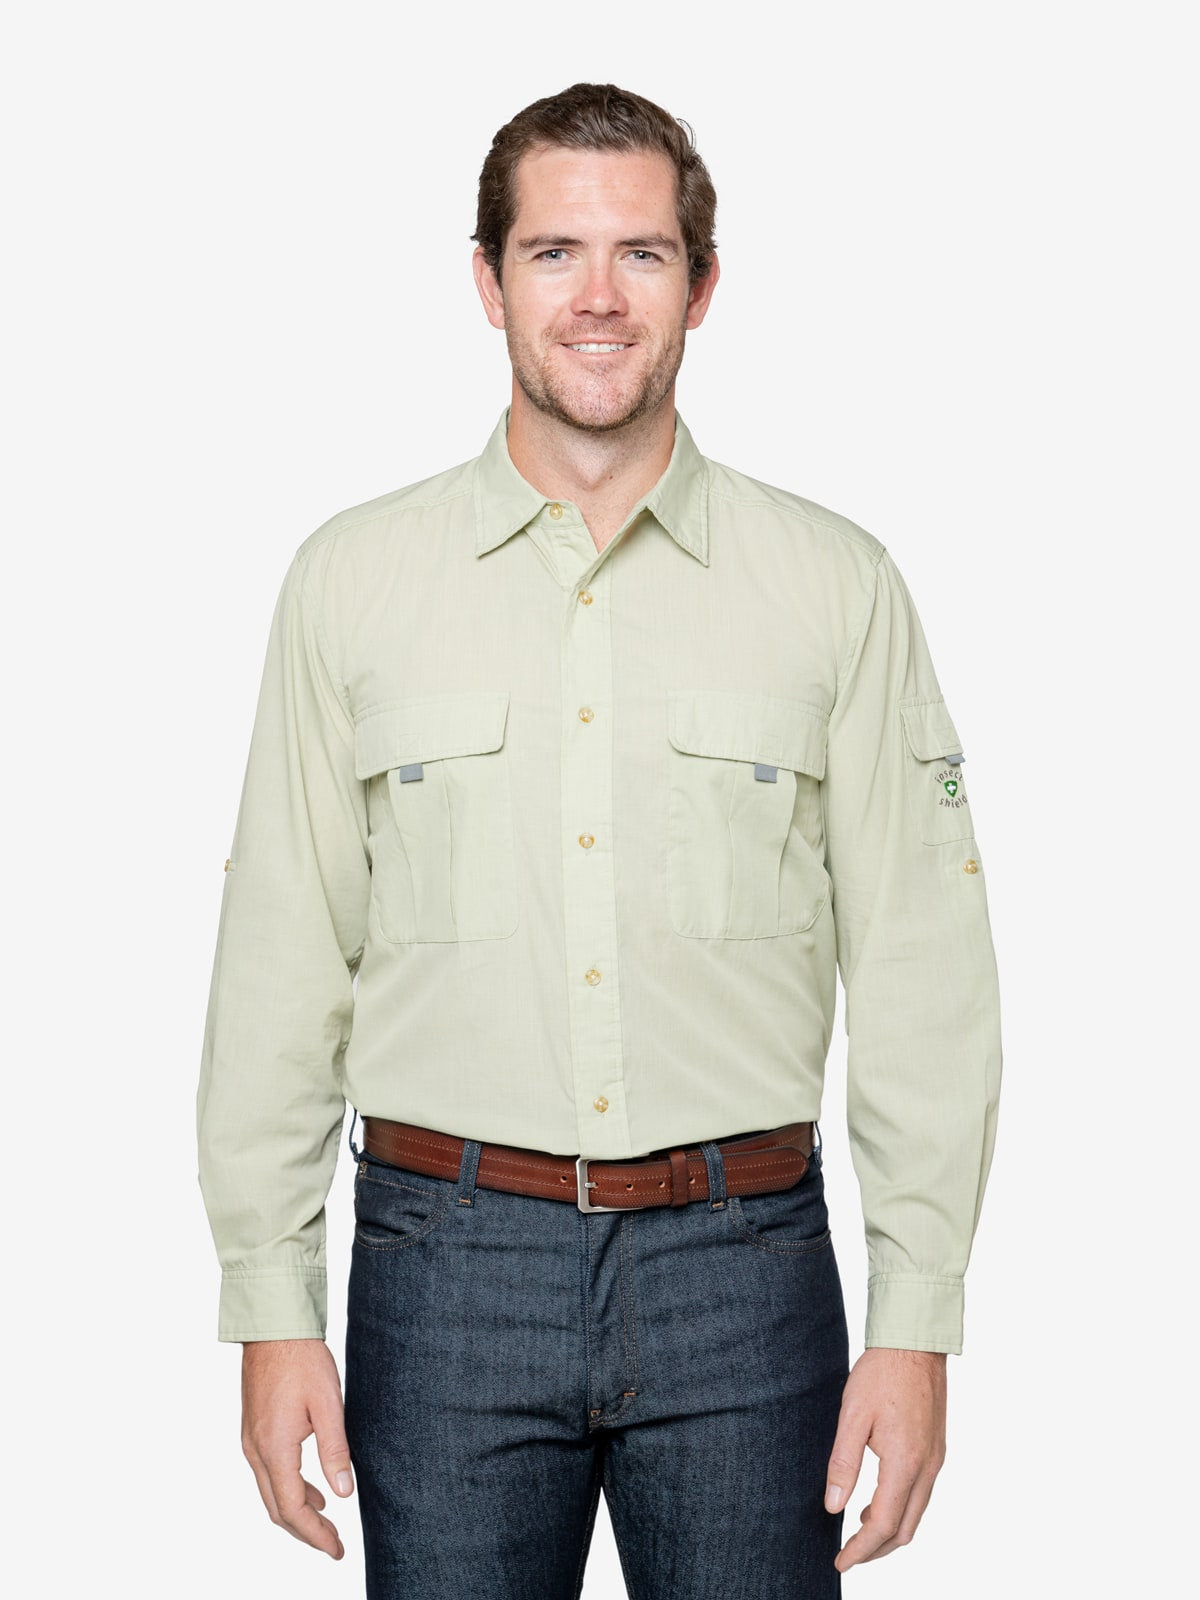 Mens Insect Shield Field Shirt Pro